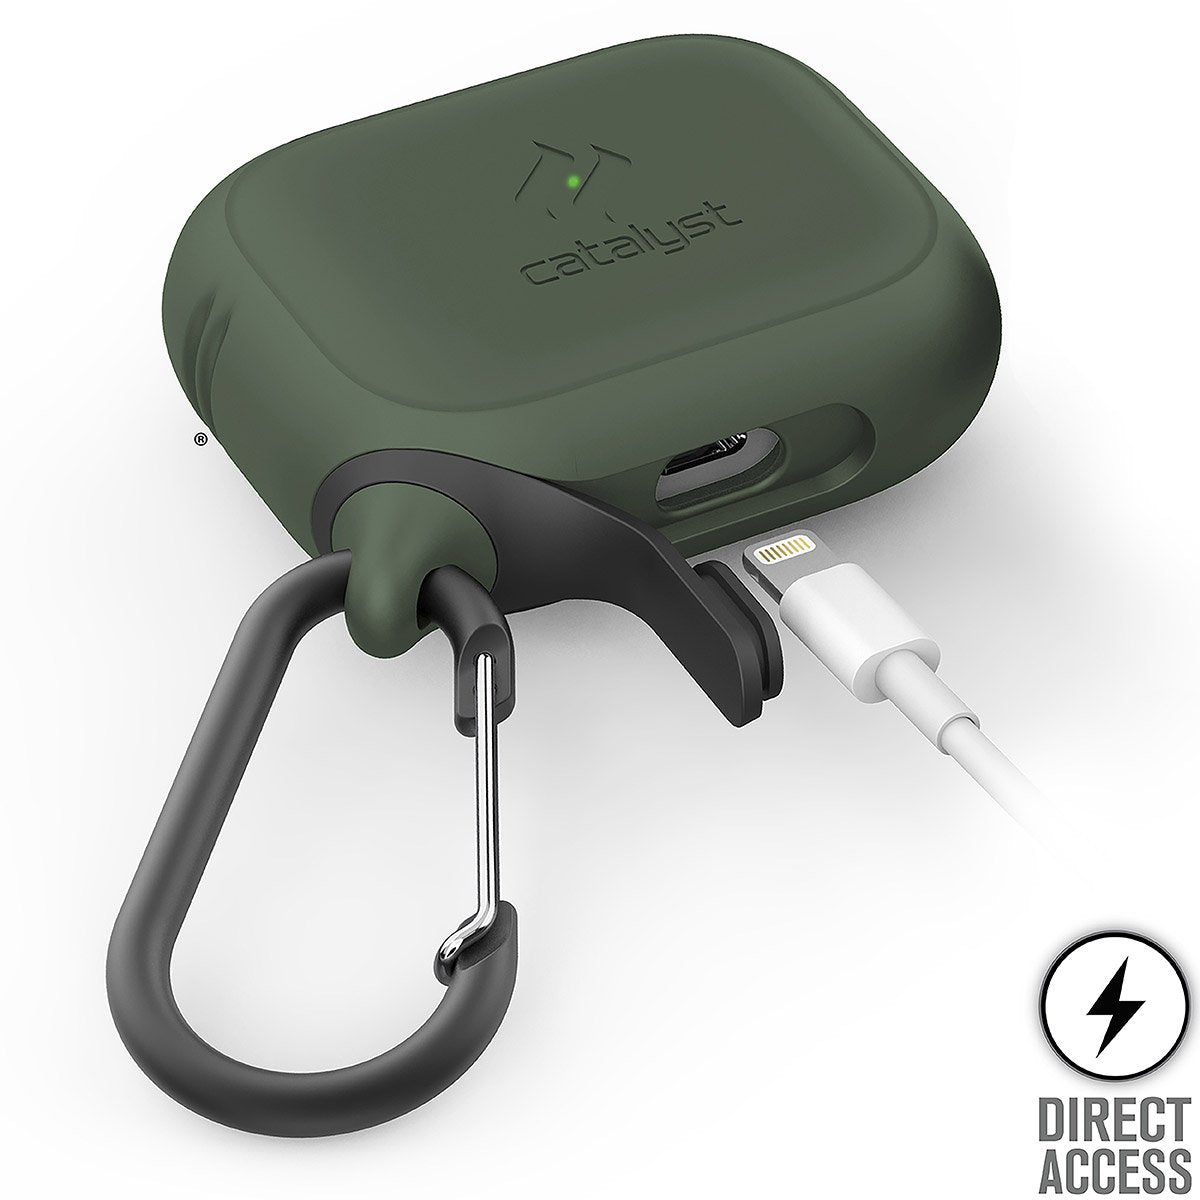 CATAPDPROGRN | catalyst airpods pro gen 2 1 waterproof case carabiner army green open charging plug text reads direct access